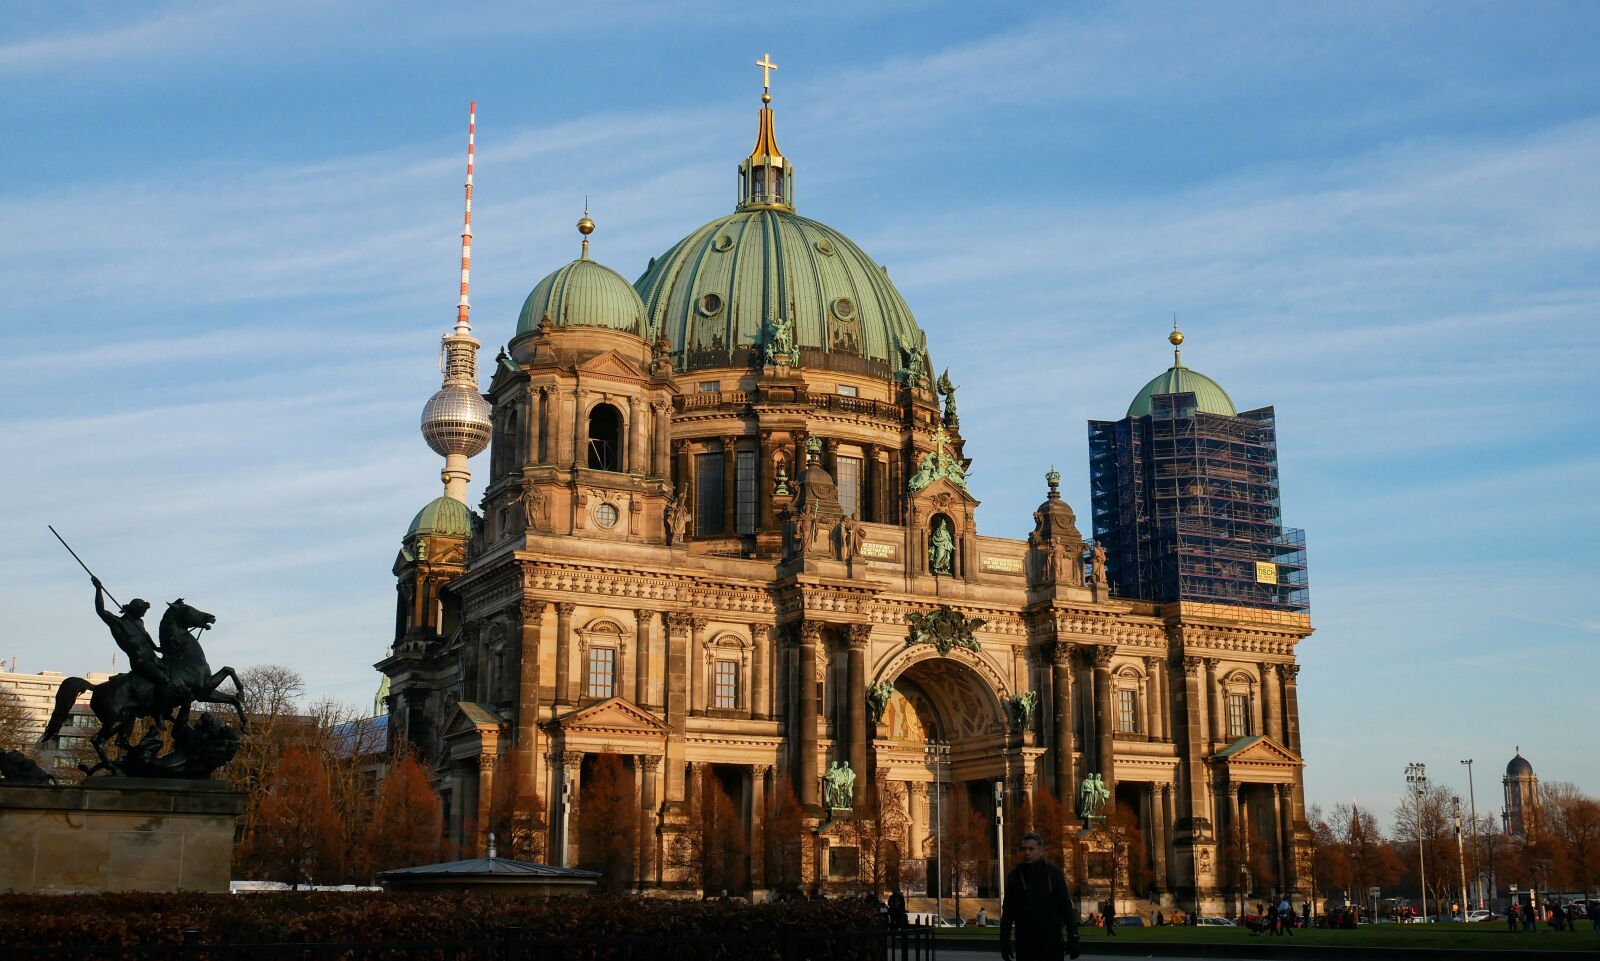 Panasonic Lumix DC-GX850 (Lumix DC-GX800 / Lumix DC-GF9) sample photo. Berlin, berlin cathedral, architecture photography